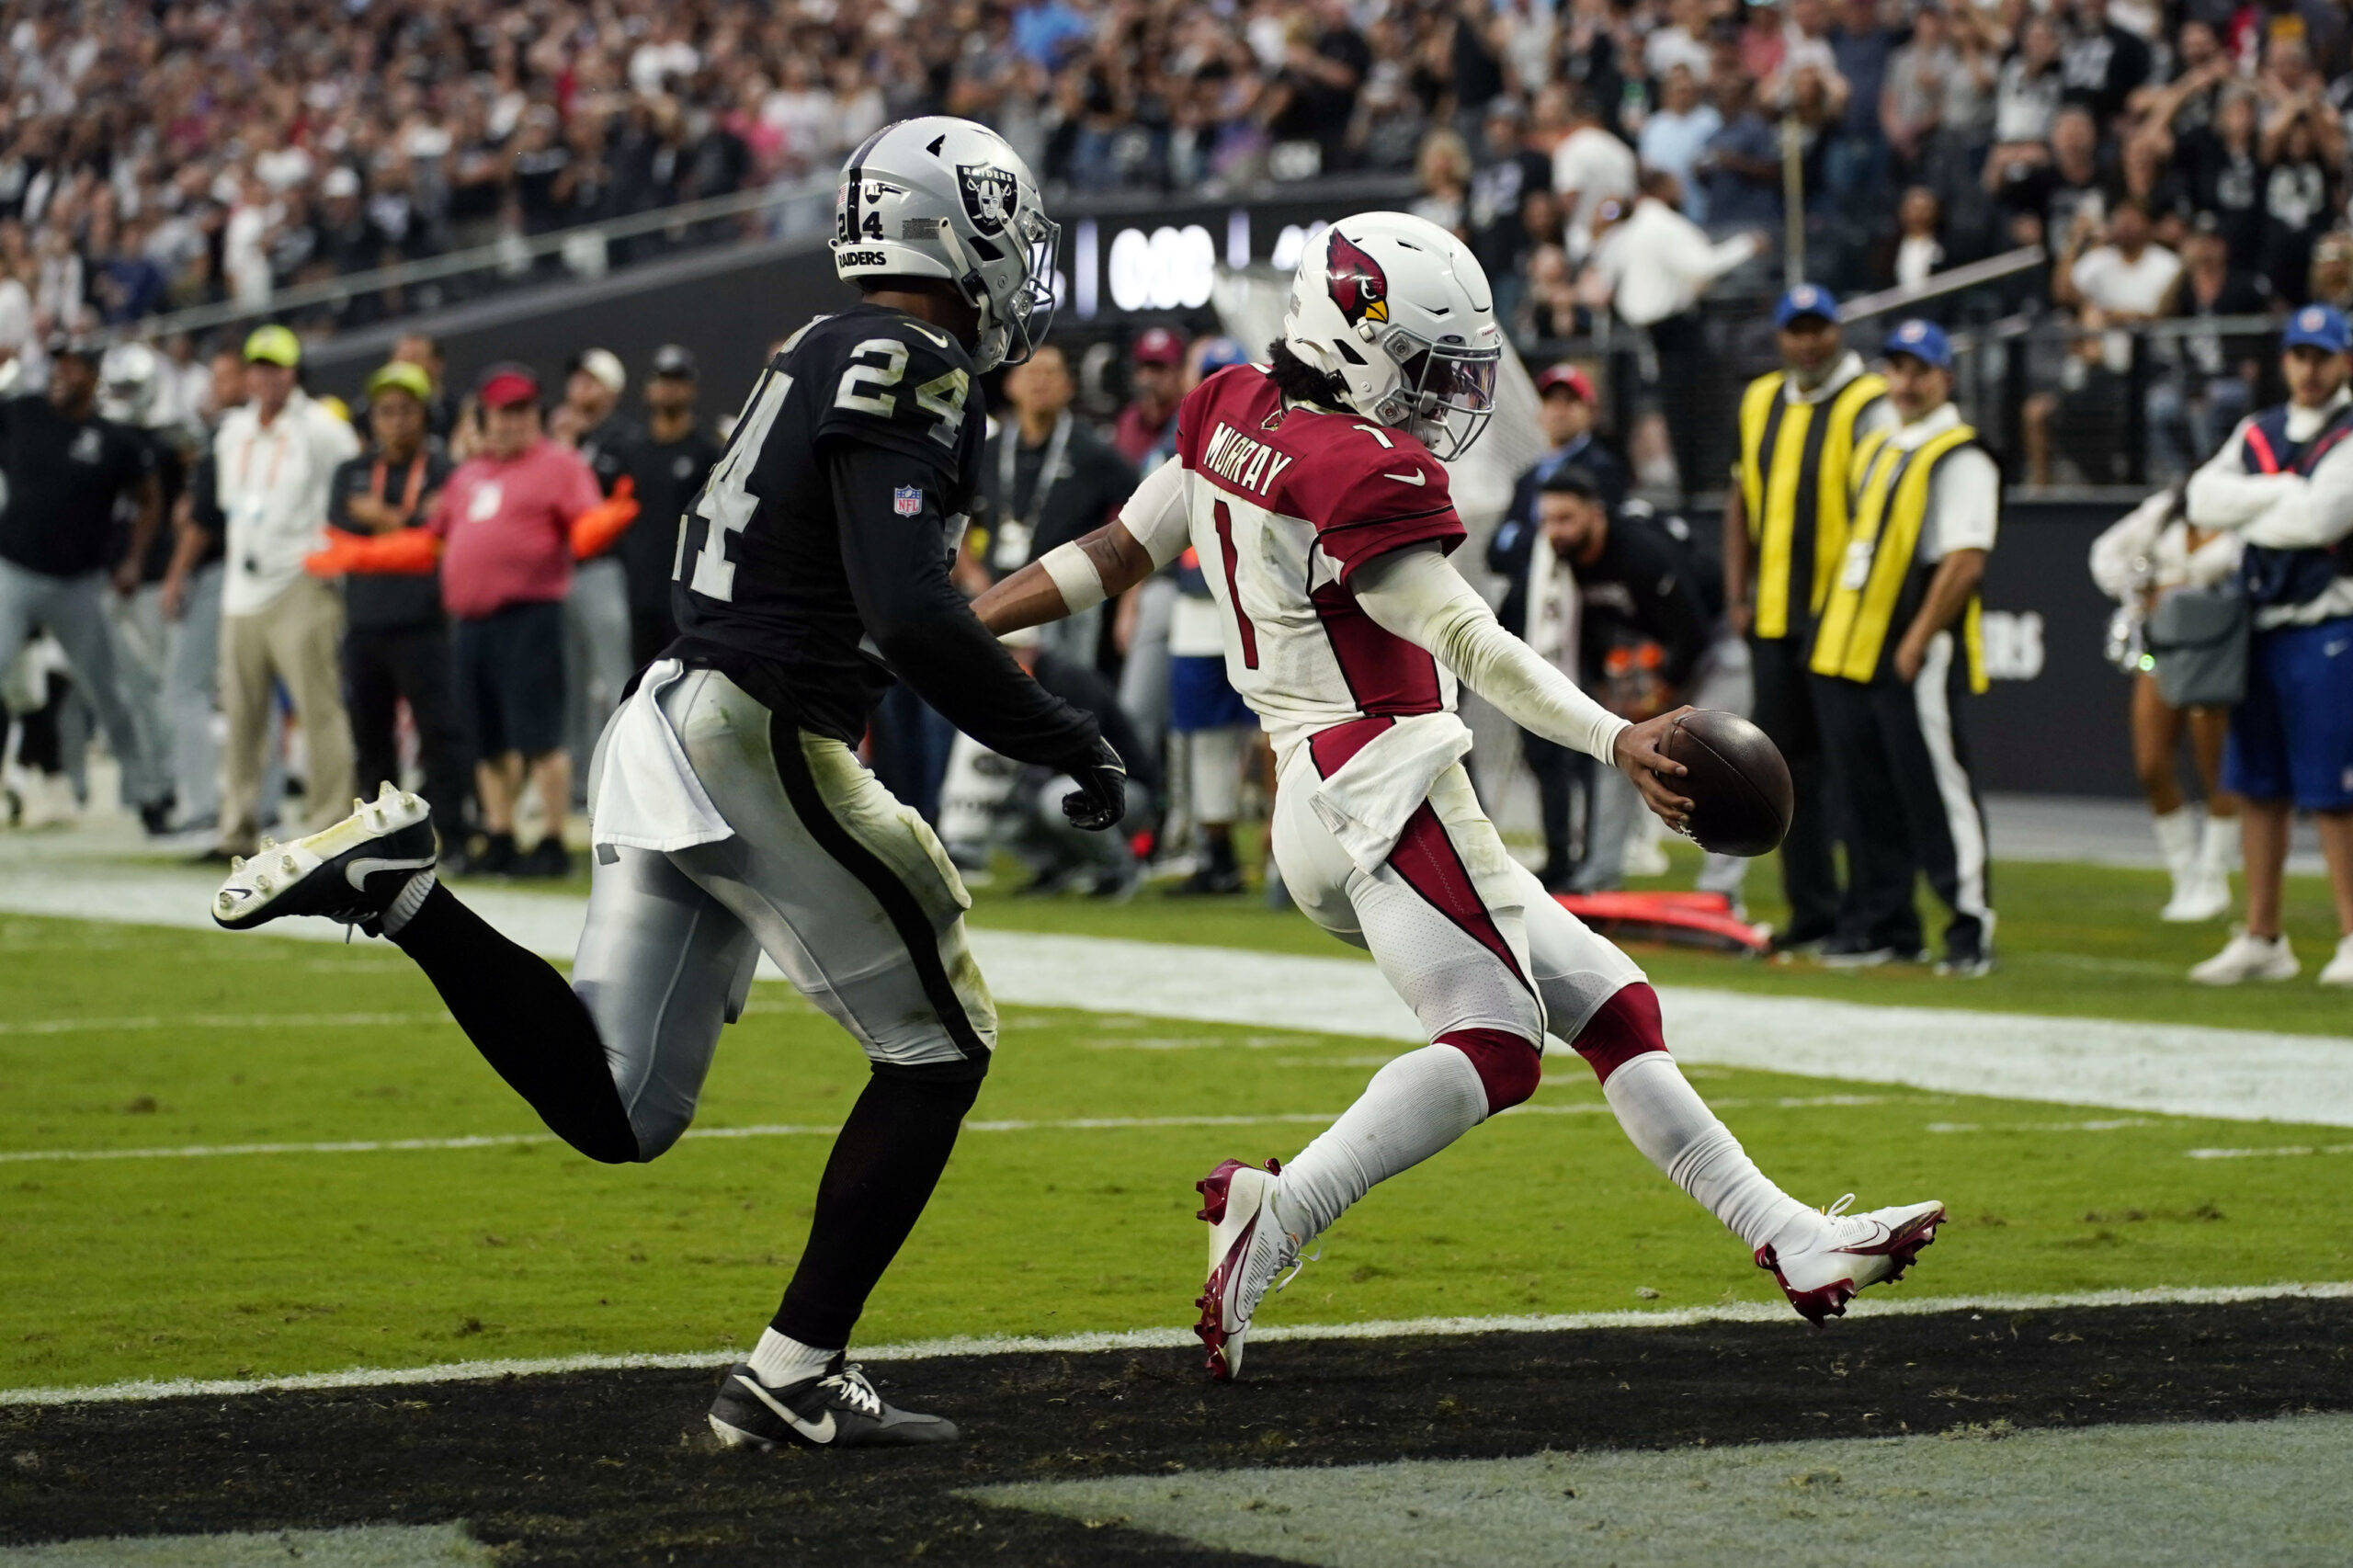 Kyler Murray’s running ability is being hampered by Cardinals’ game plan